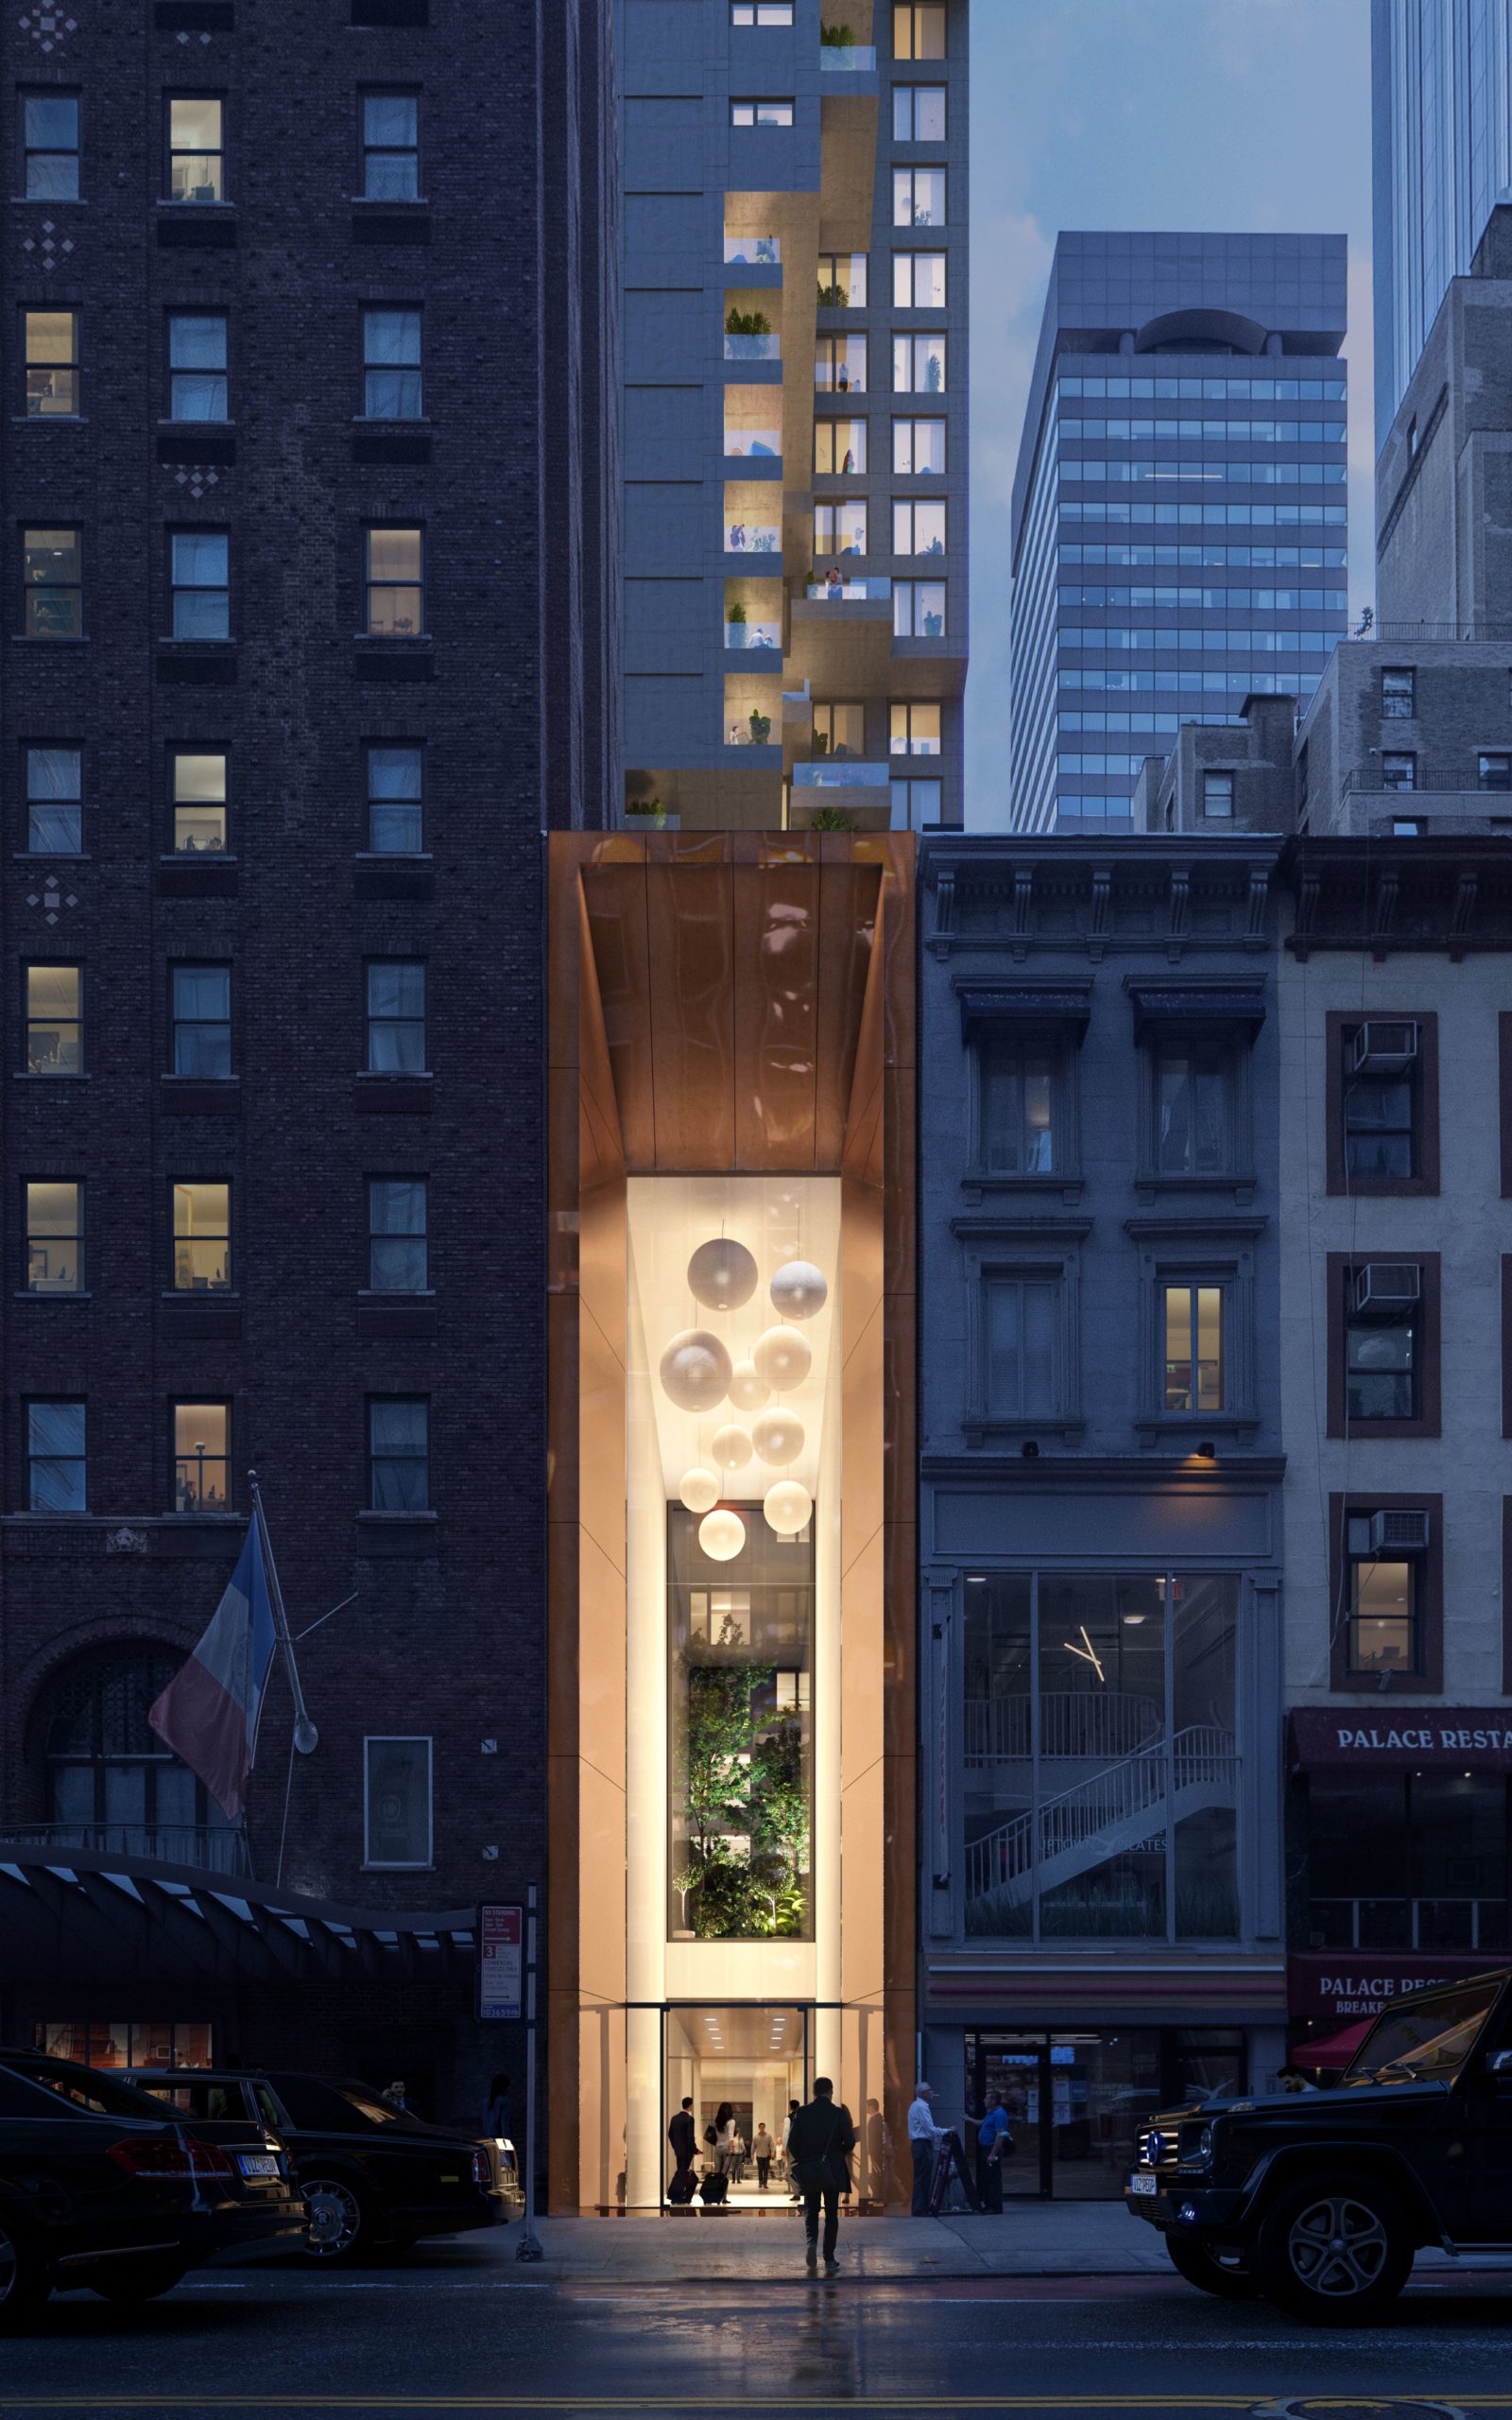 36 East 57th Street – Alpha Space NYC